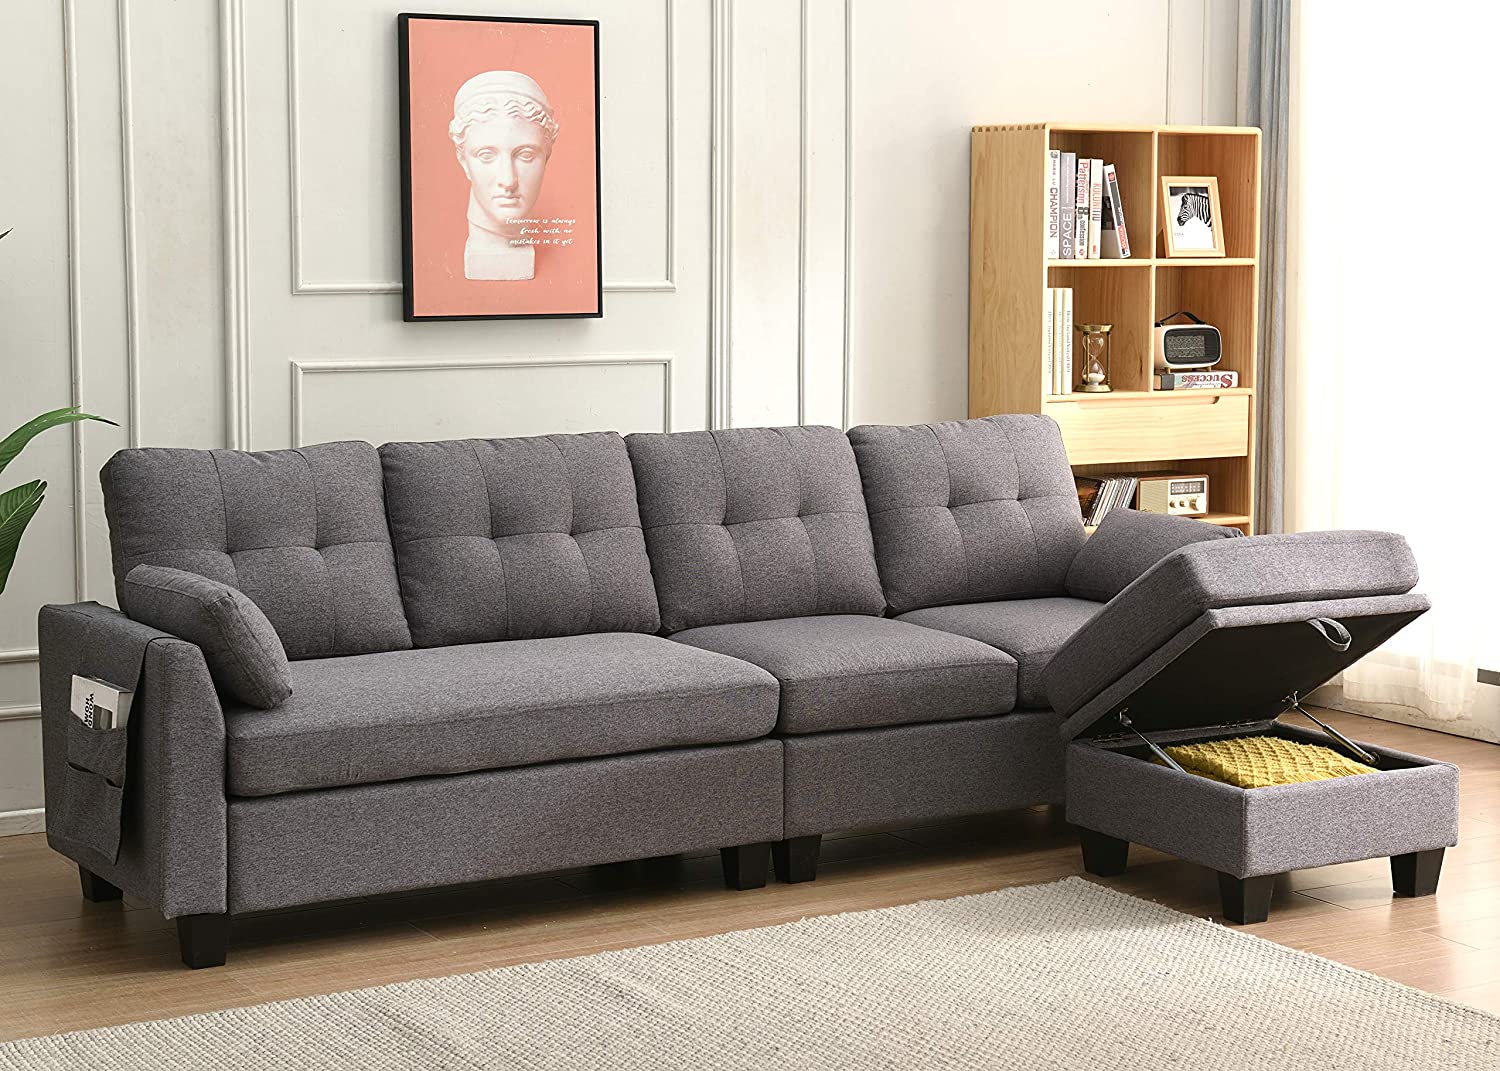 4 seater sofa bed with storage